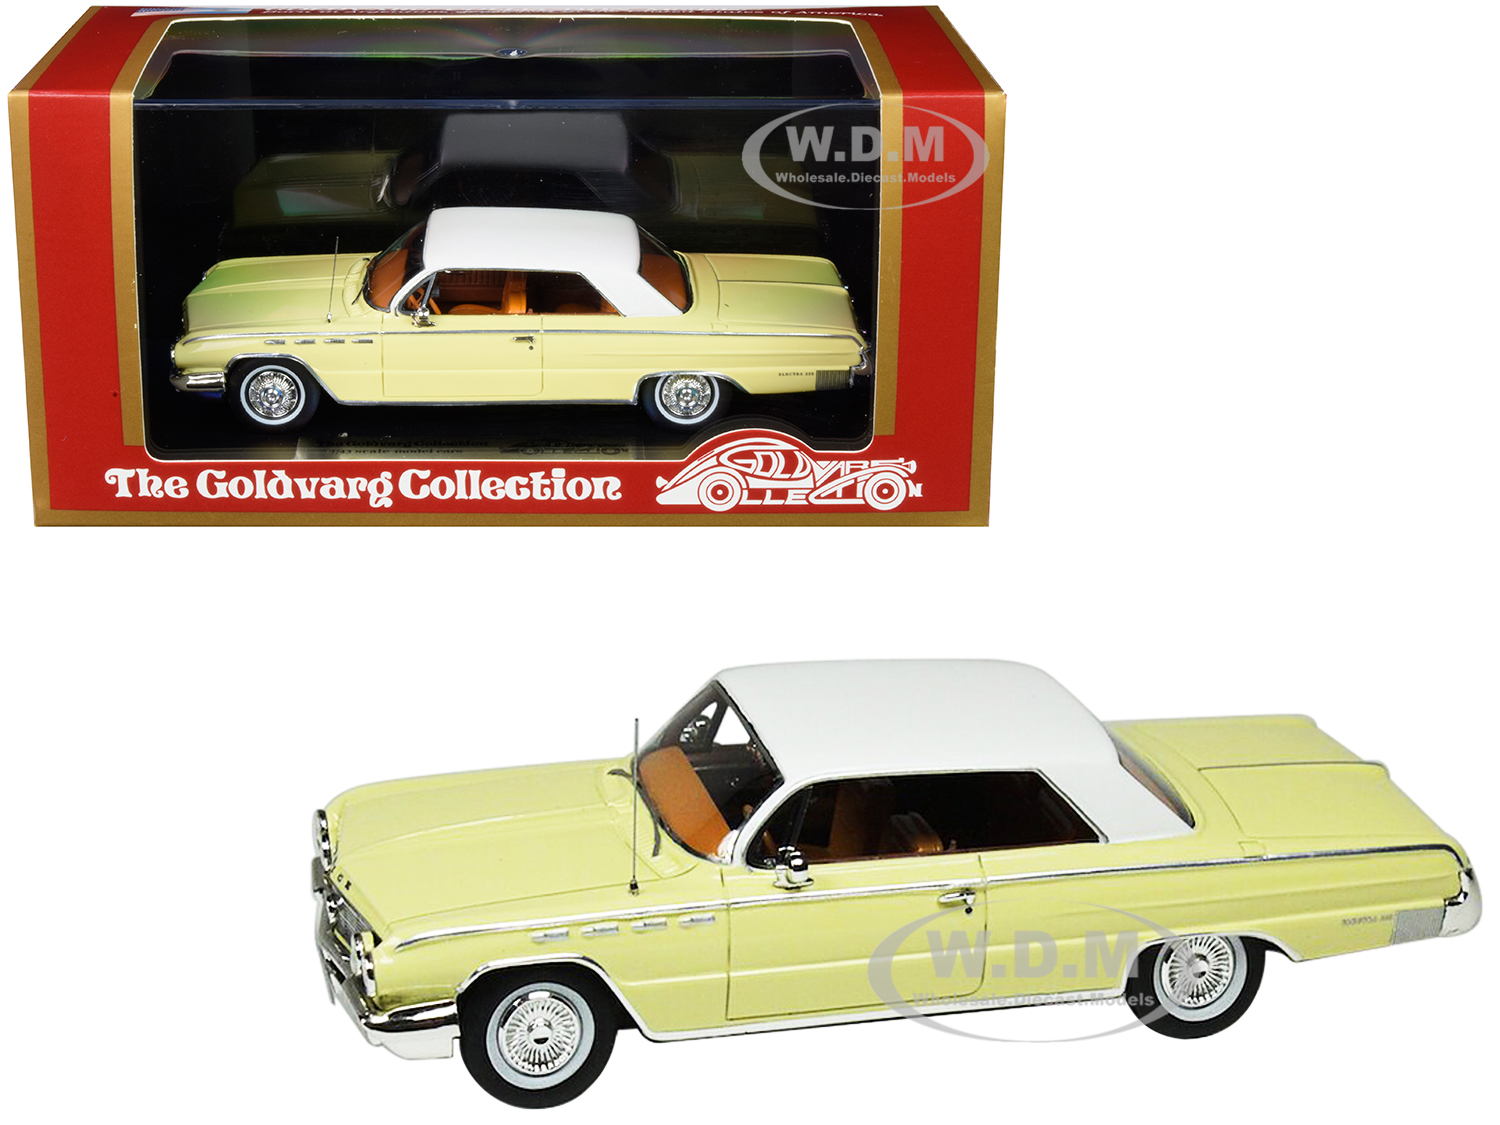 1962 Buick Electra 225 Cameo Cream With White Top Limited Edition To 210 Pieces Worldwide 1/43 Model Car By Goldvarg Collection